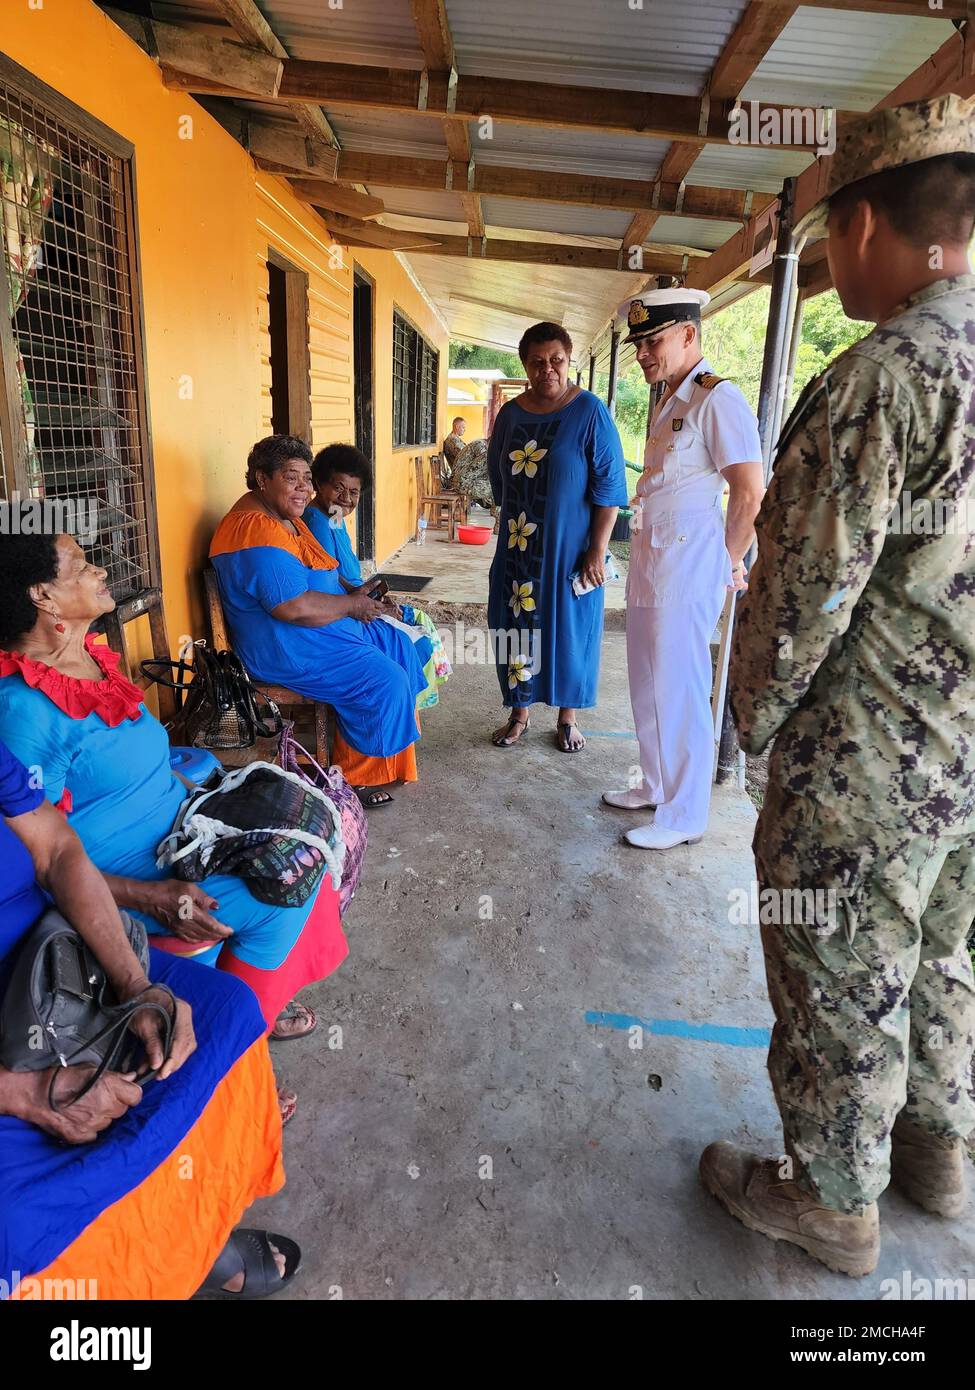 FIJI (July 2, 2022) – Captain Kerri Harris, of the U.K. Royal Navy serving as the U.S. Pacific Fleet Director for Humanitarian Assistance/Disaster Relief and Combined Operations, speaks with Fiji natives at the Navonu Primary School constructed by U.S. Navy Seabees assigned to Naval Mobile Construction Battalion THREE (NMCB3) and Republic of Fiji Military Forces (RFMF) Engineers in support of Pacific Partnership 2022. Now in its 17th year, Pacific Partnership is the largest annual multinational humanitarian assistance and disaster relief preparedness mission conducted in the Indo-Pacific. Stock Photo